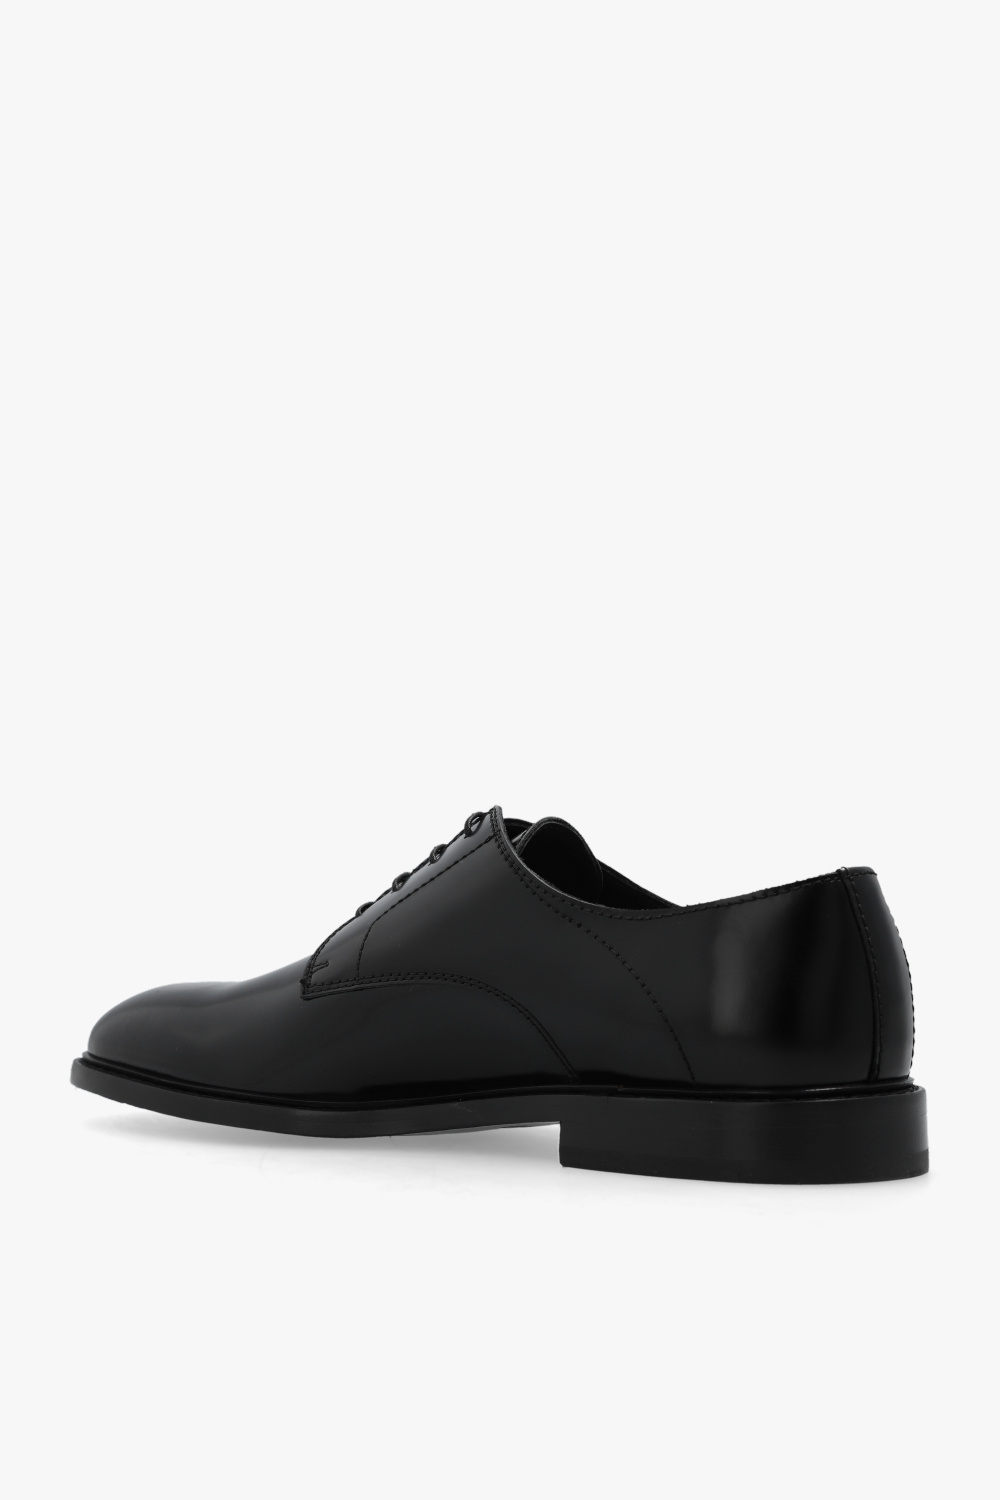 Moschino Leather Derby Kay shoes